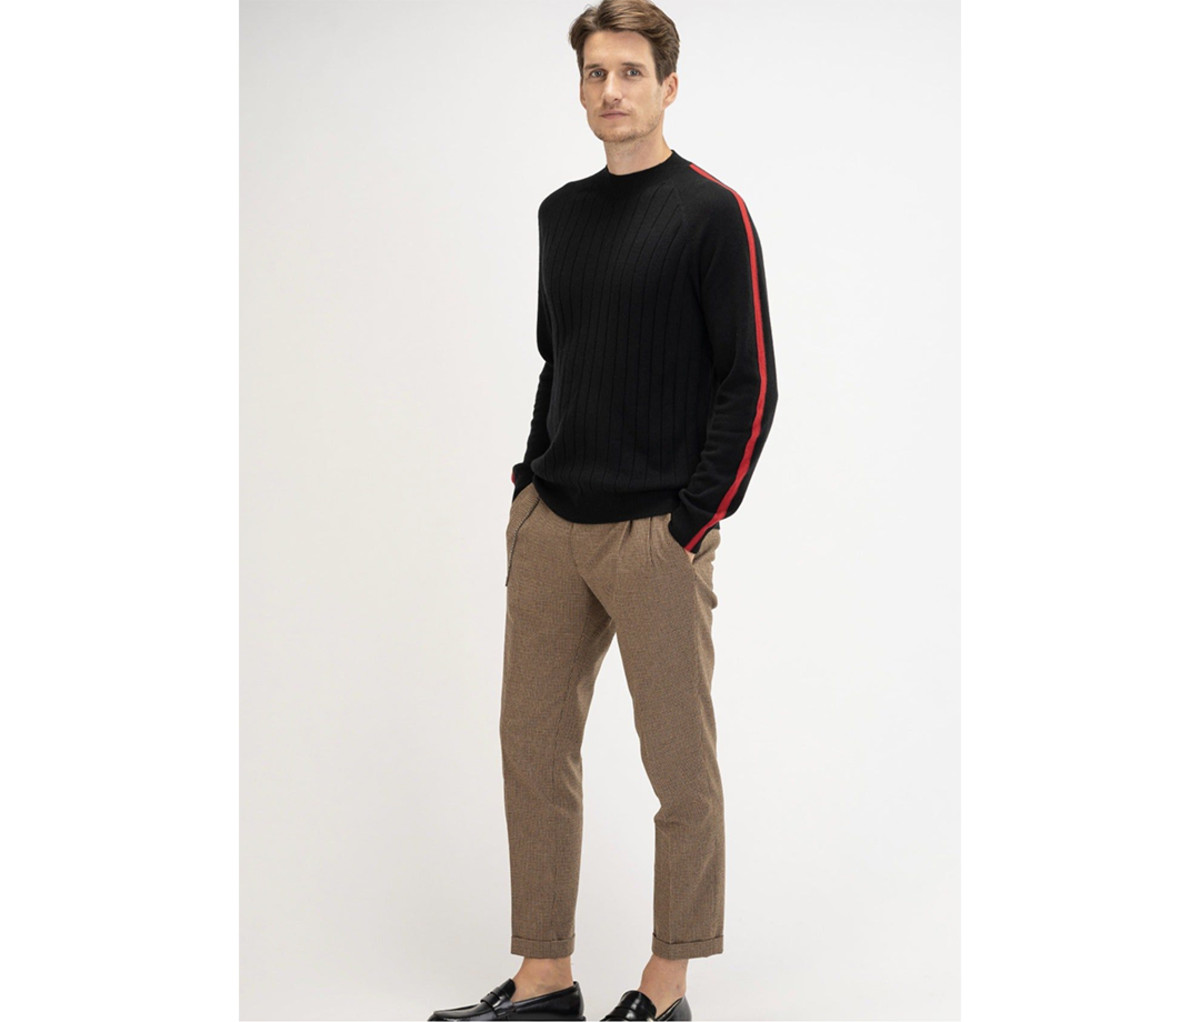 Get Your Fall Wardrobe Ready With This Color Tipped Crew Neck - Men's ...